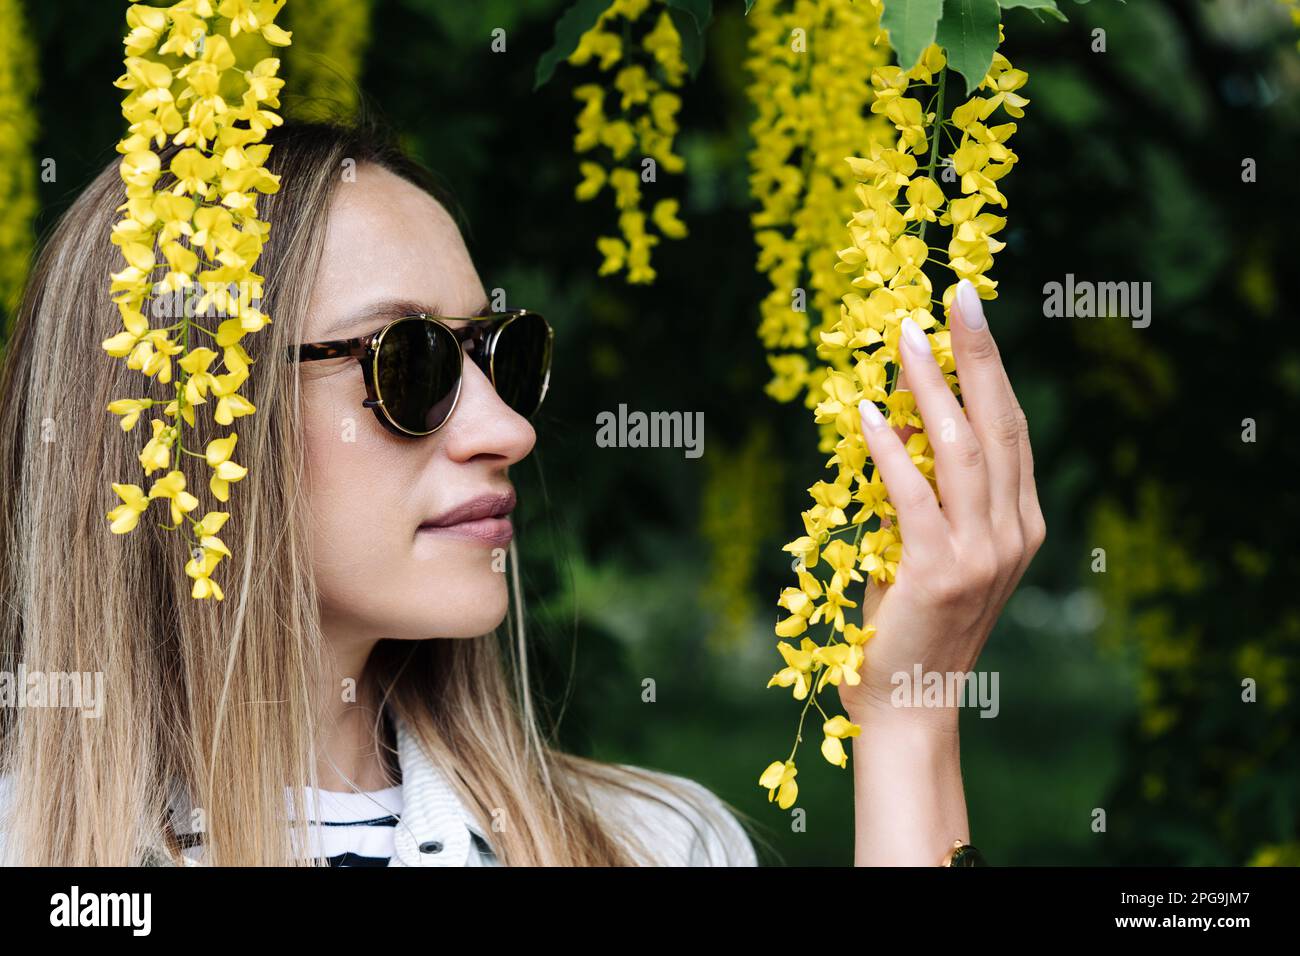 A woman holds in her hand the inflorescence of Laburnum anagyroides Stock Photo